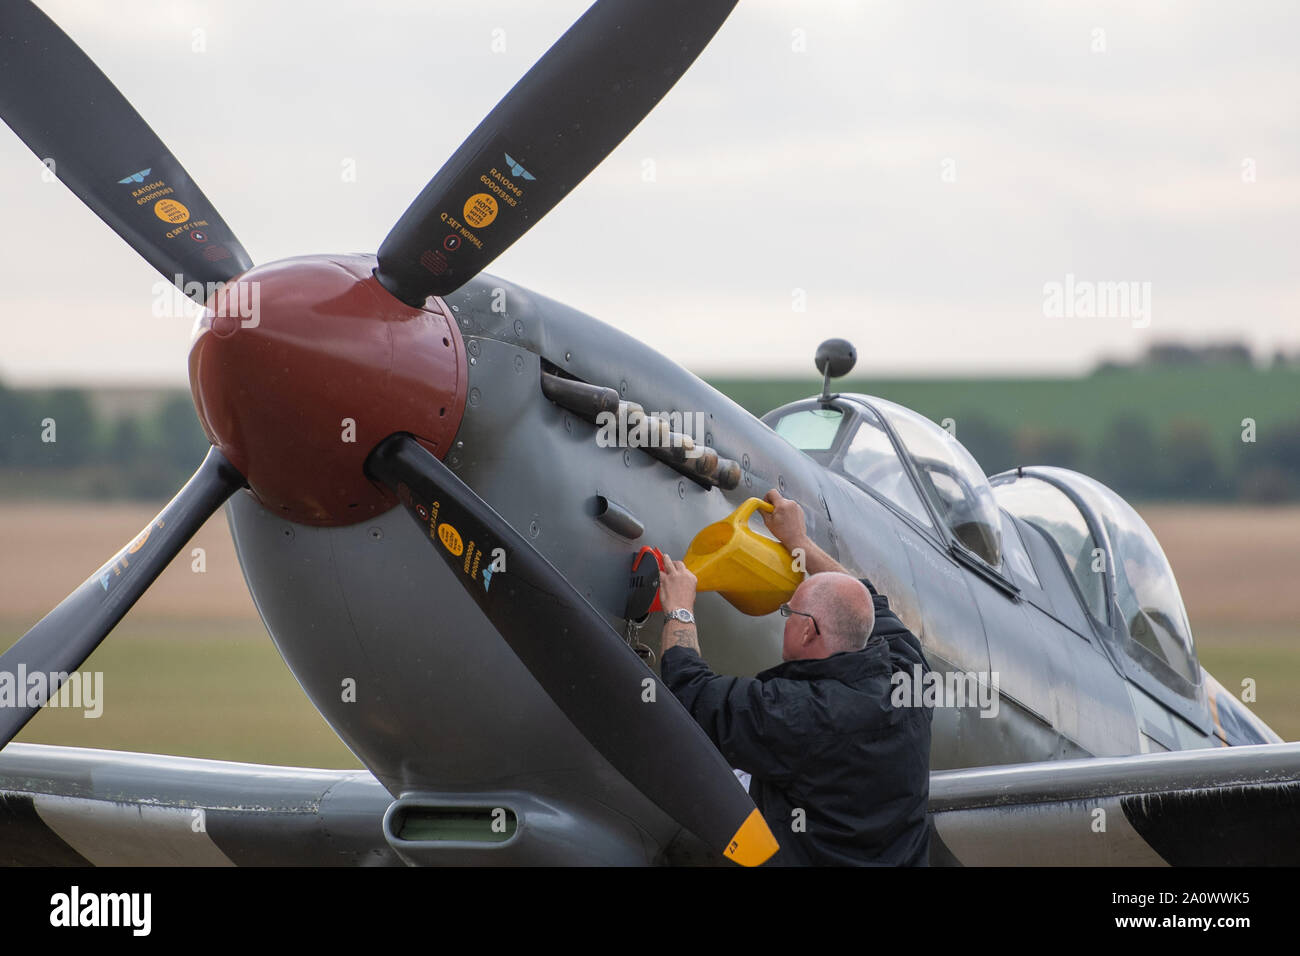 A flight mechanic checks the oil on his Supermarine Spitfire during the Duxford Battle of Britain Air Show at the Imperial War Museum in Duxford, Cambridgeshire. Stock Photo